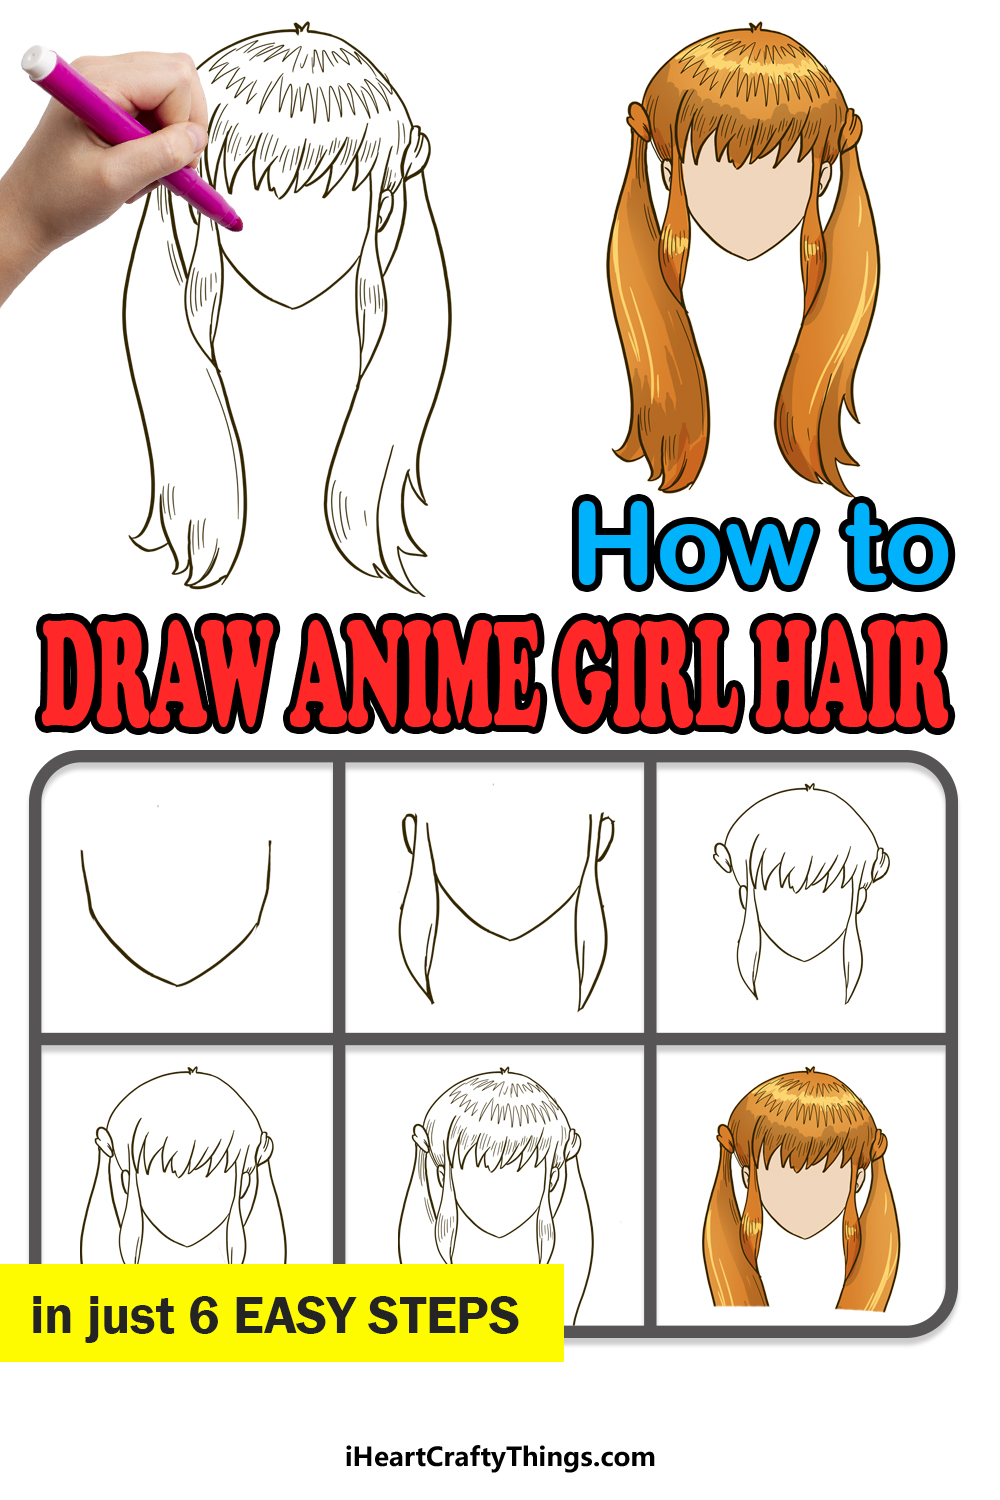 How to Draw Anime Girls Hair step by step guide